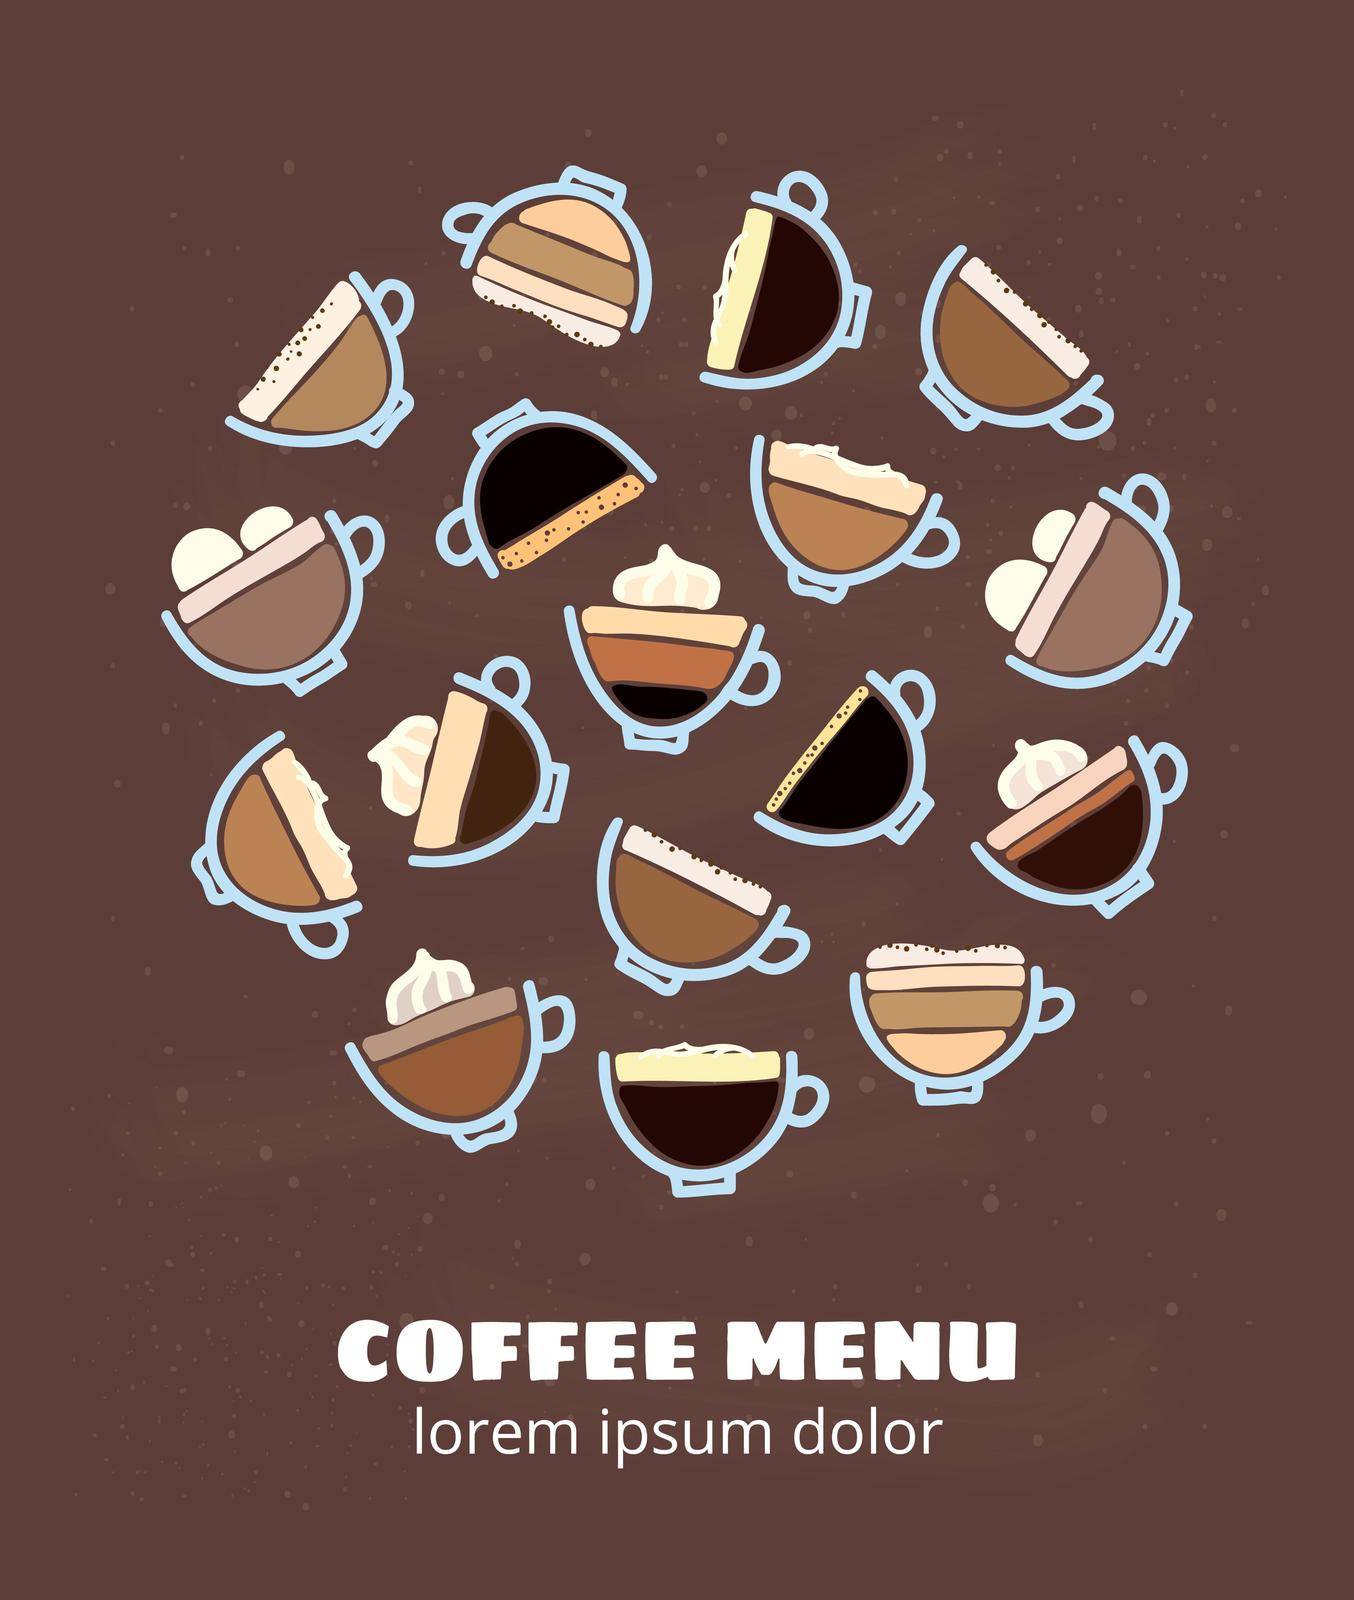 Doodle coffee drinks in circle. by Minur